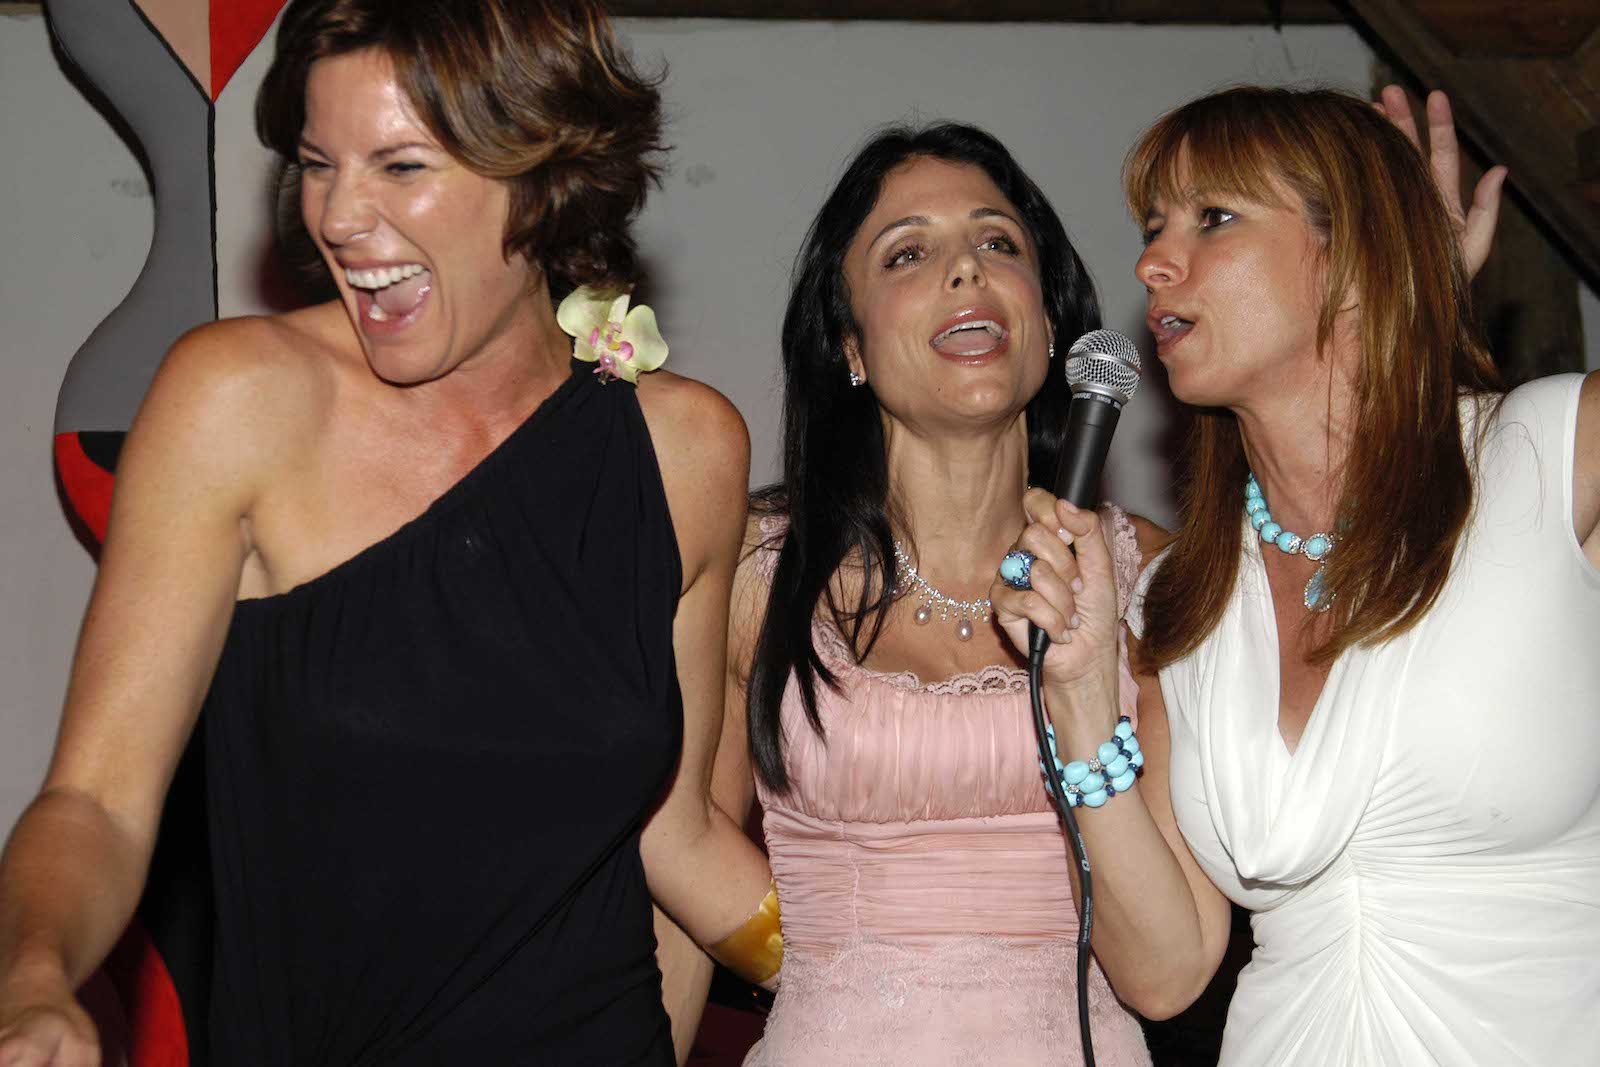 Luann de Lesseps, Bethenny Frankel, and Jill Zarin from RHONY sing at the Help for Orphans International Summer Benefit